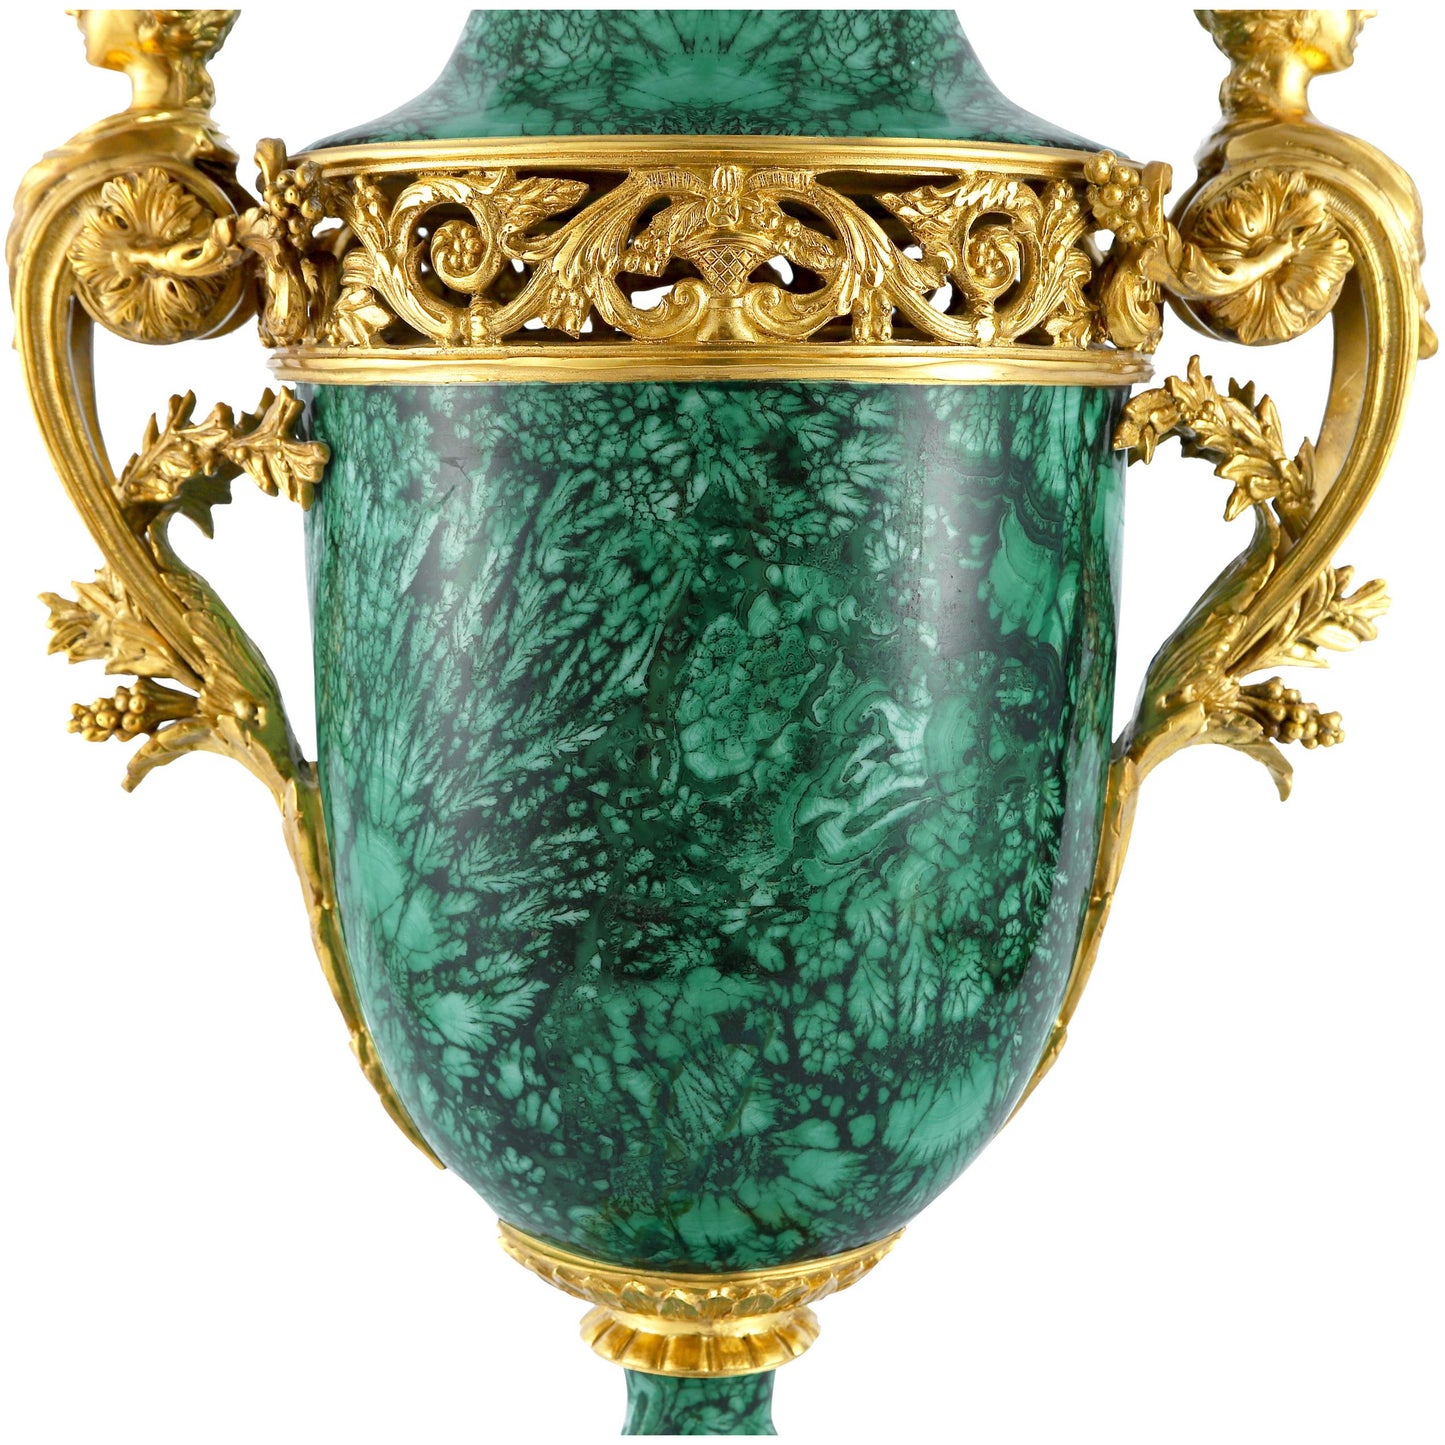 DECOELEVEN ™ Bronze and Porcelain Jar in Classic Green